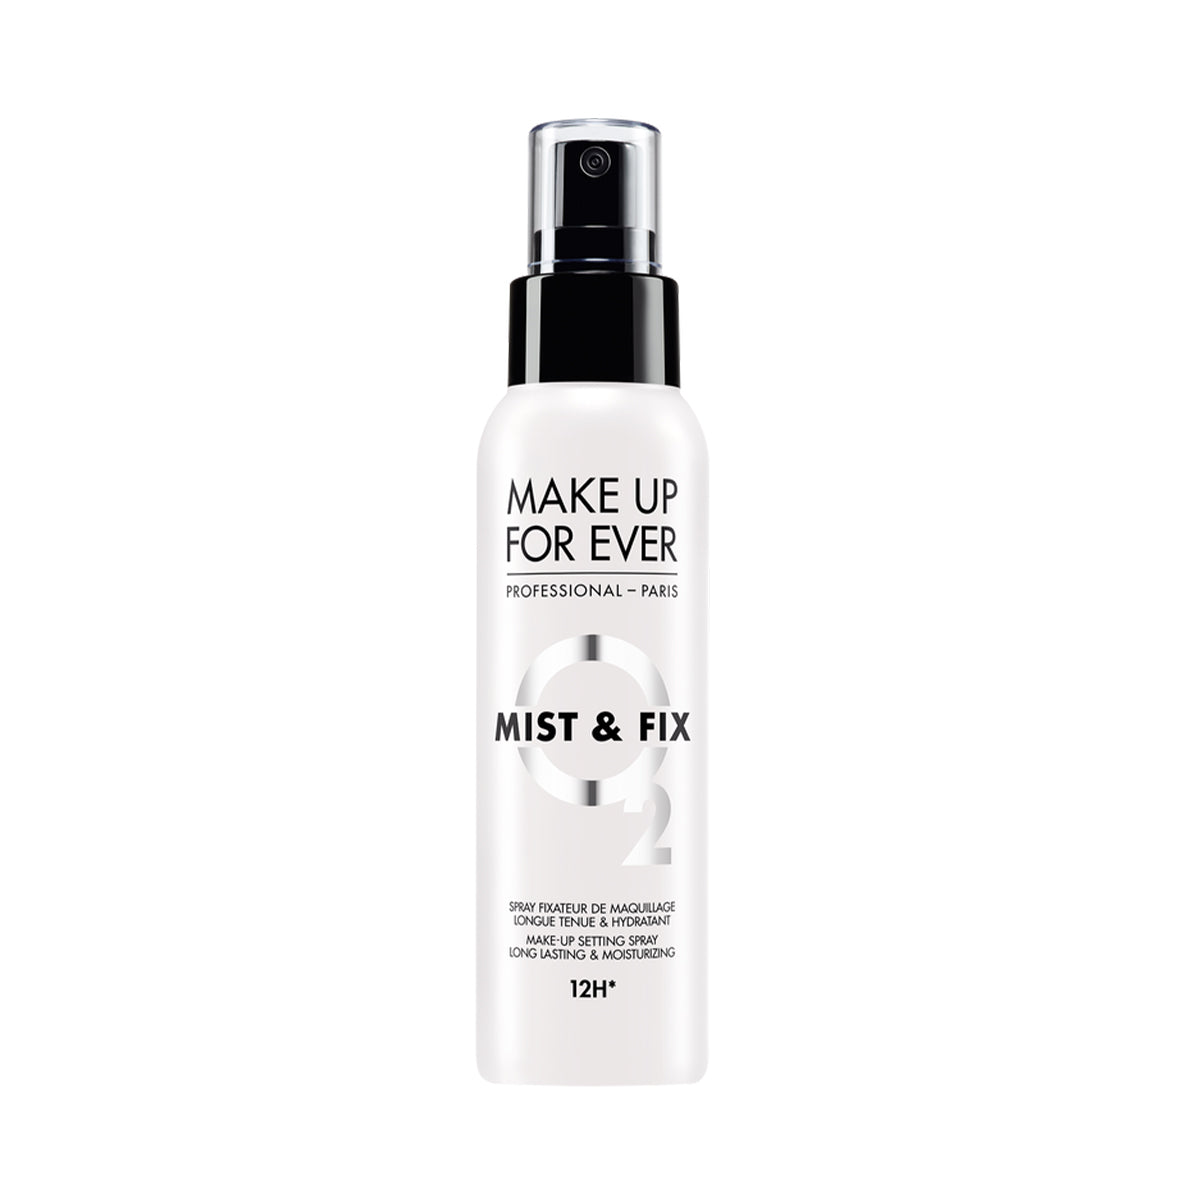 Mist & Fix Spray - MAKE UP FOR EVER PHILIPPINES